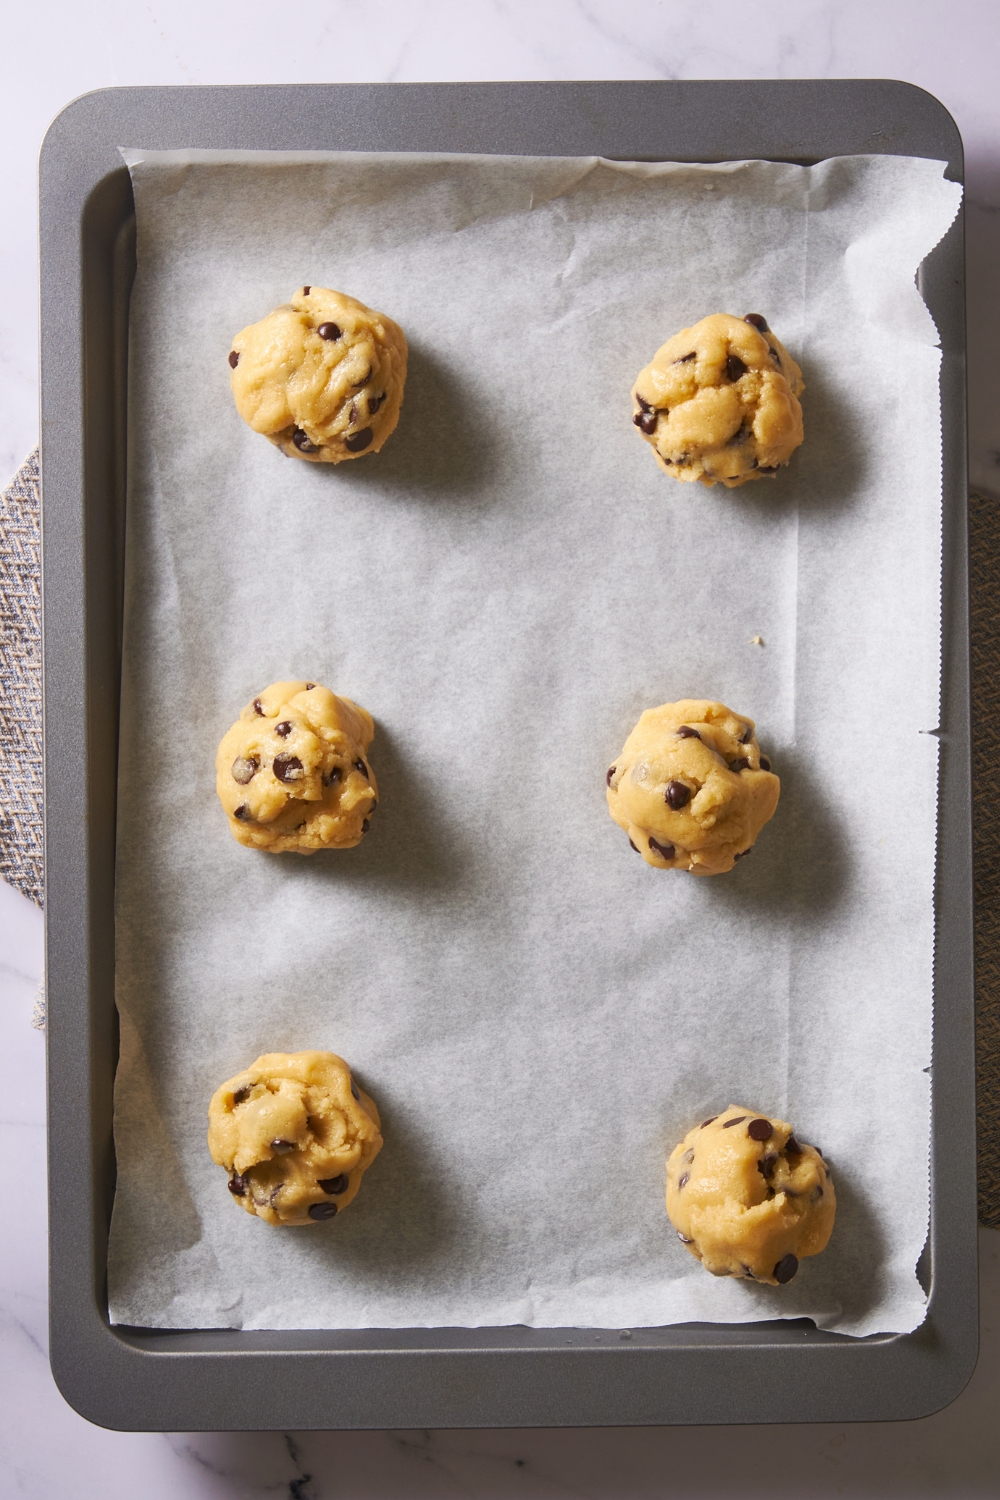 Six cookie dough balls on a baking sheet lined with parchment paper.